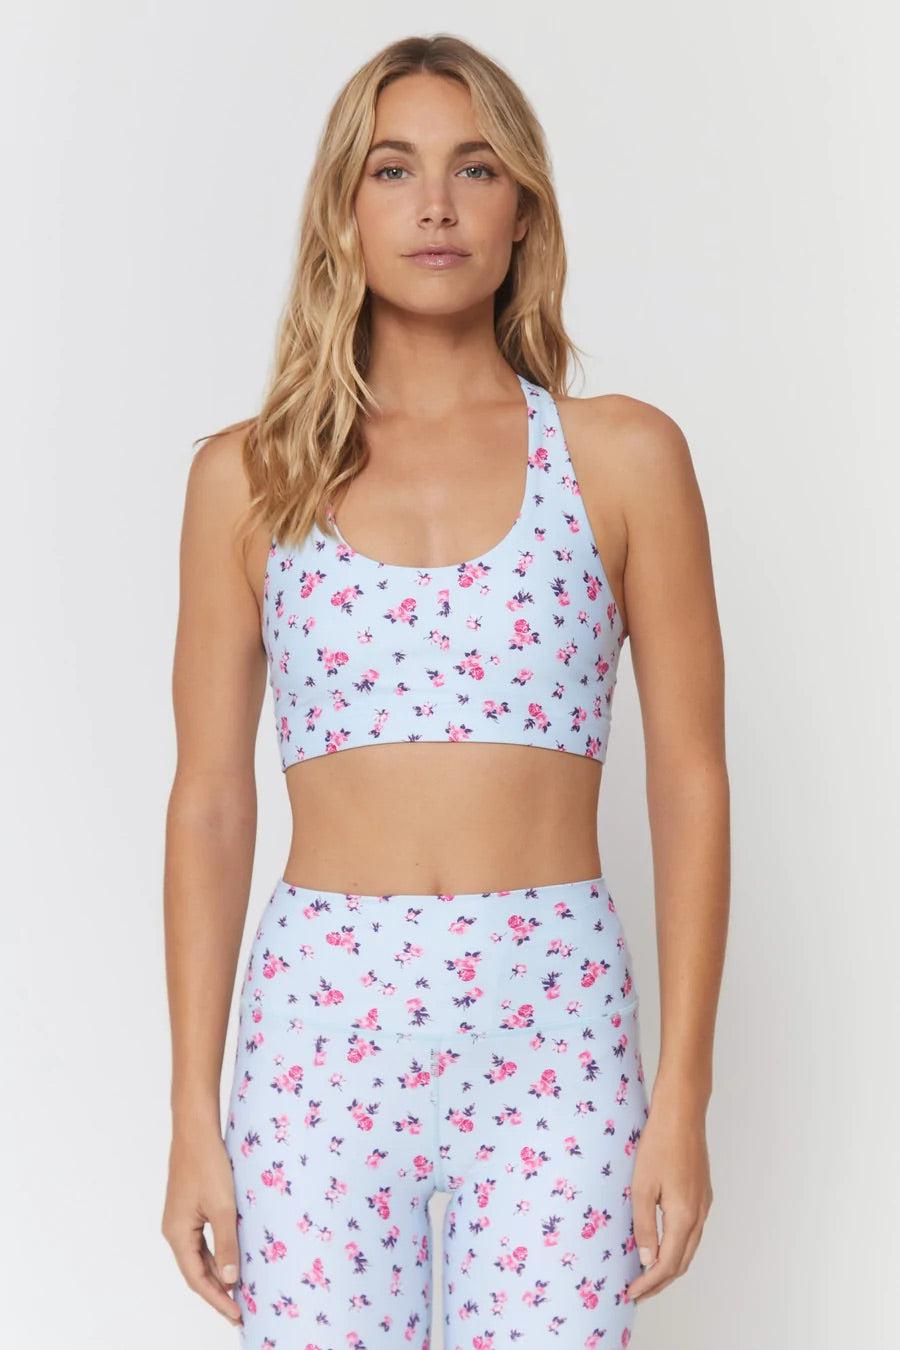 Shop Spiritual Gangster Verve Eco Jersey Sports Bra in Positano Floral Print - Premium Cropped Top from Spiritual Gangster Online now at Spoiled Brat 